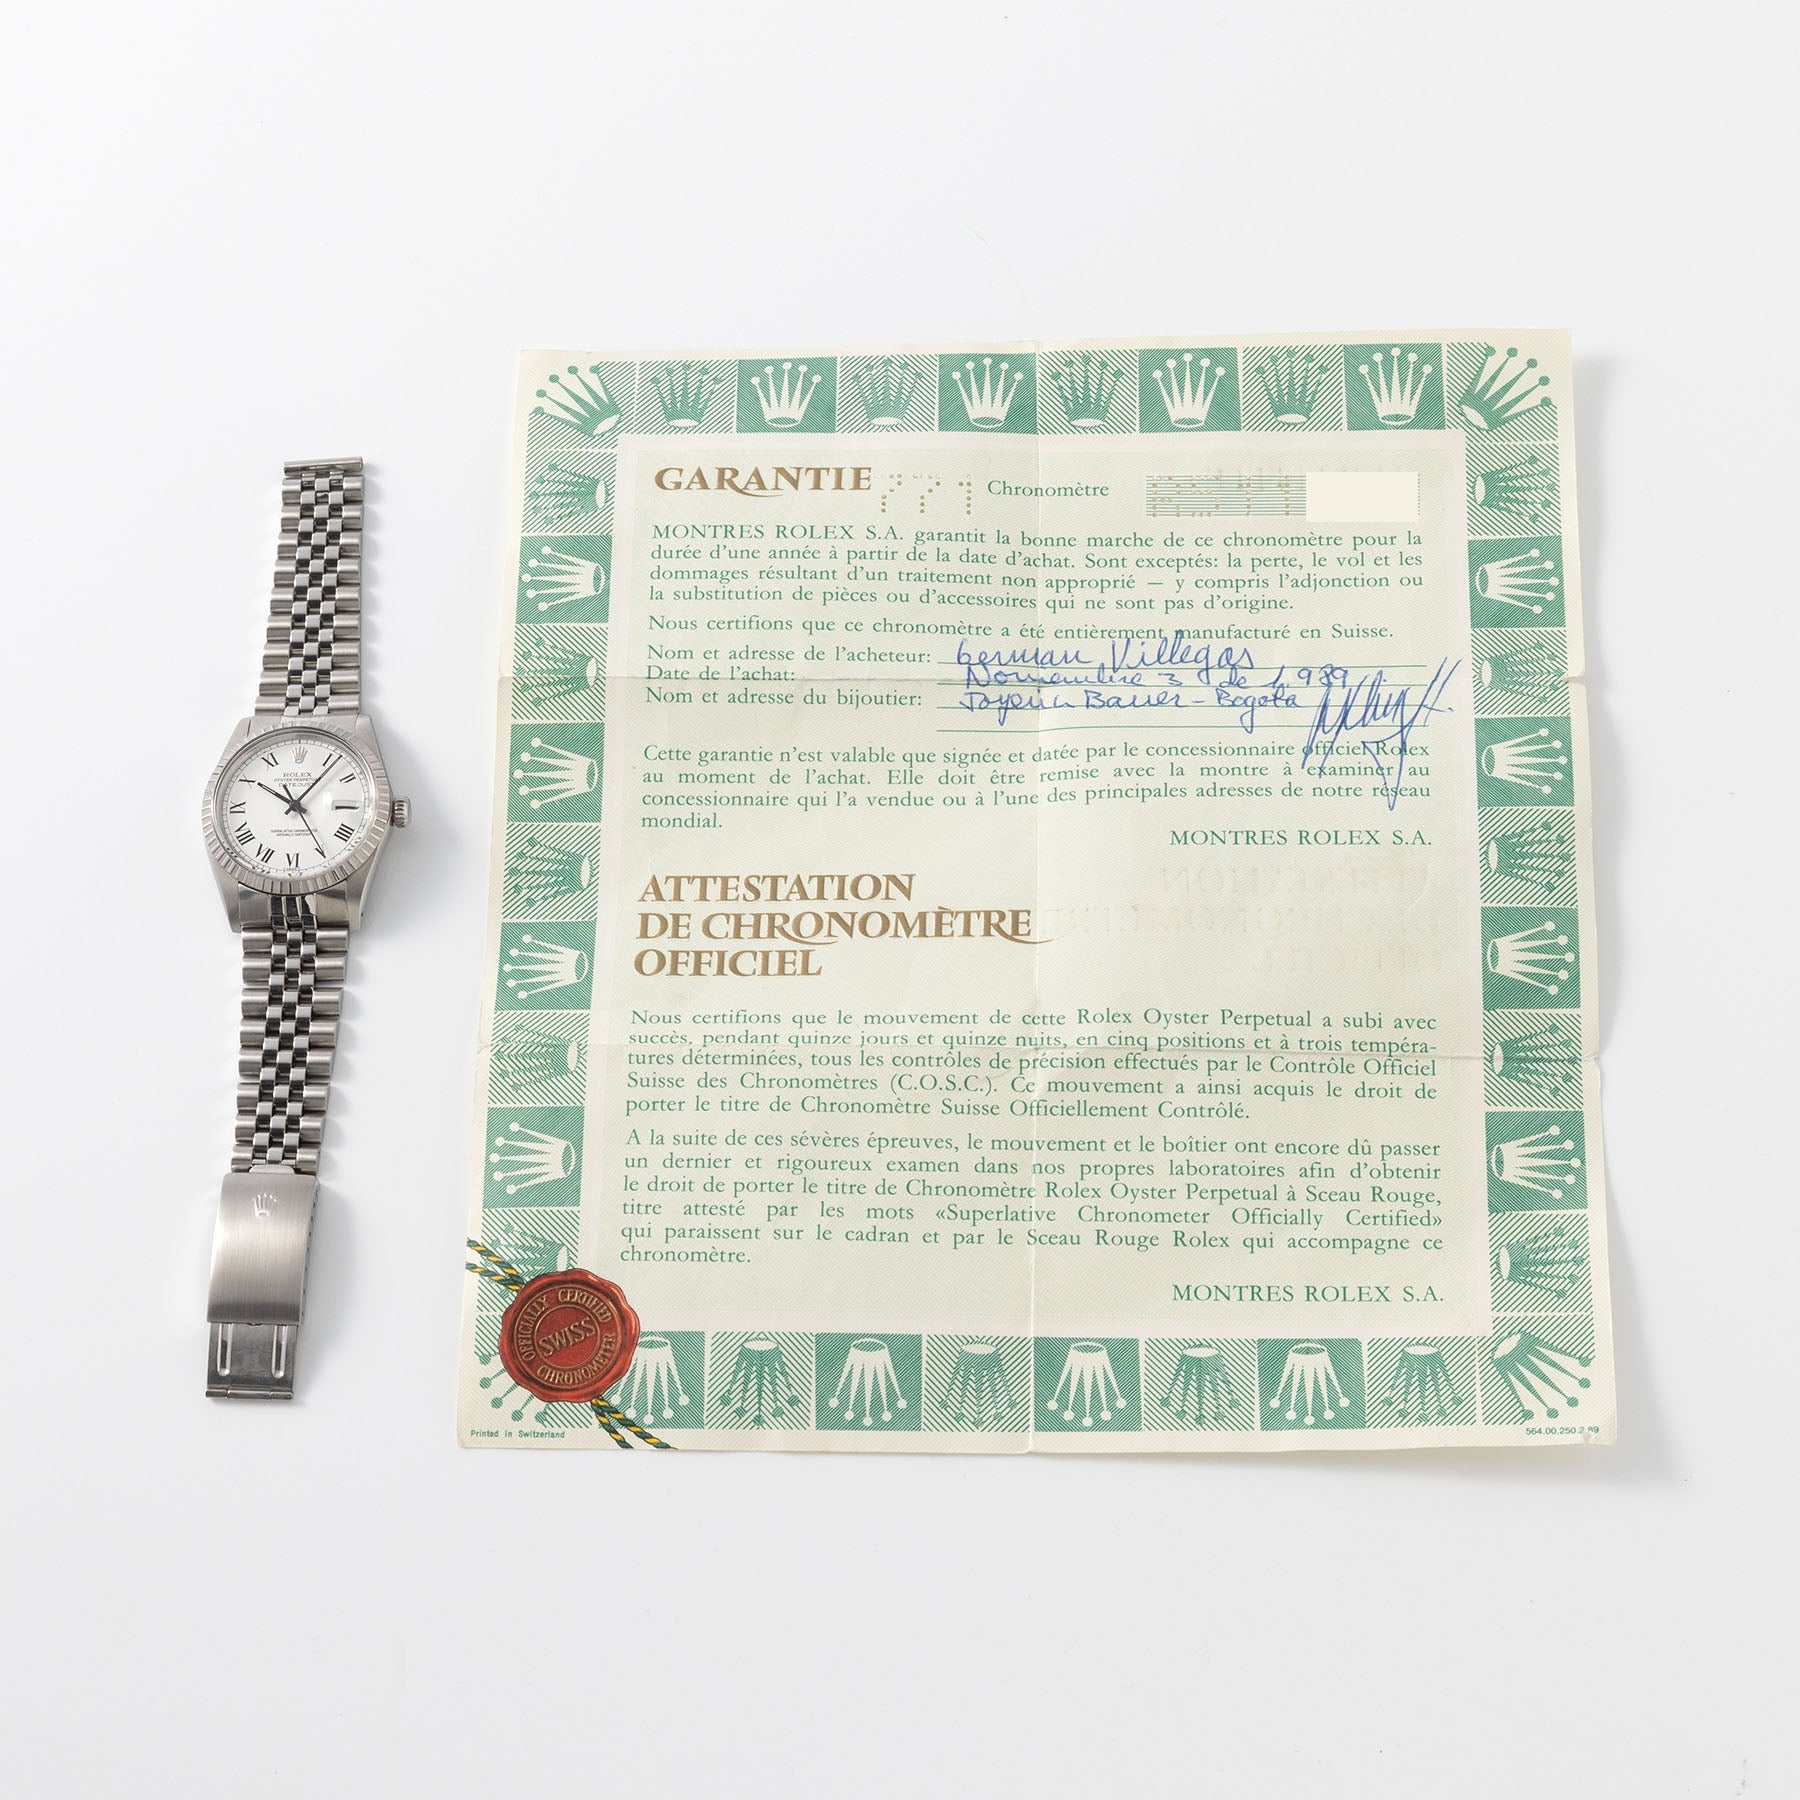 Rolex Datejust 16030 White Buckley Dial with Guarantee Papers